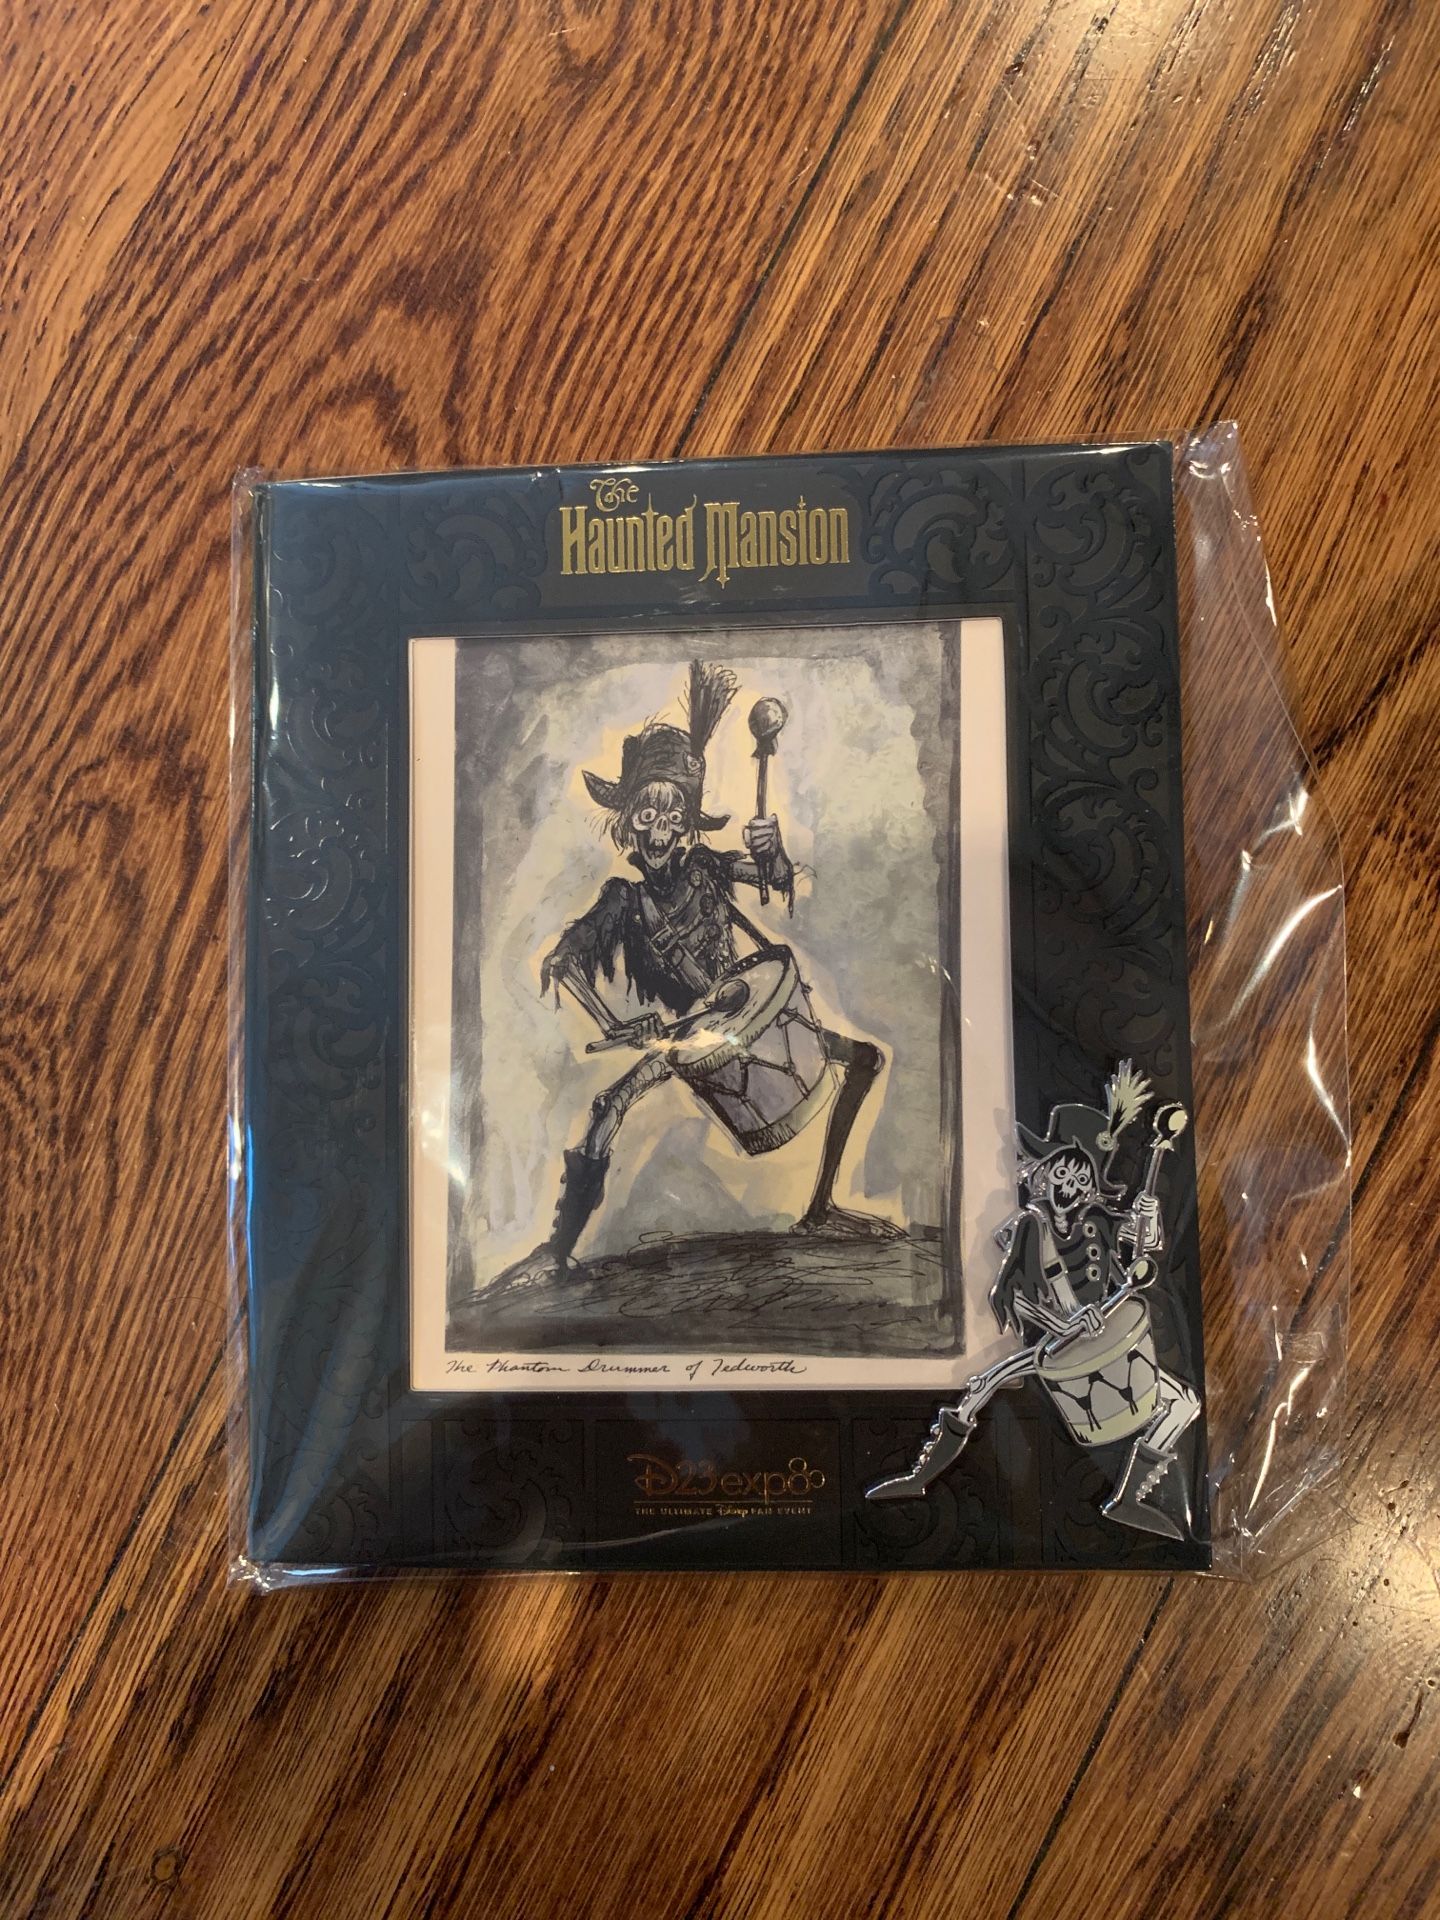 HAUNTED MANSION PIN COLLECTORS ITEM